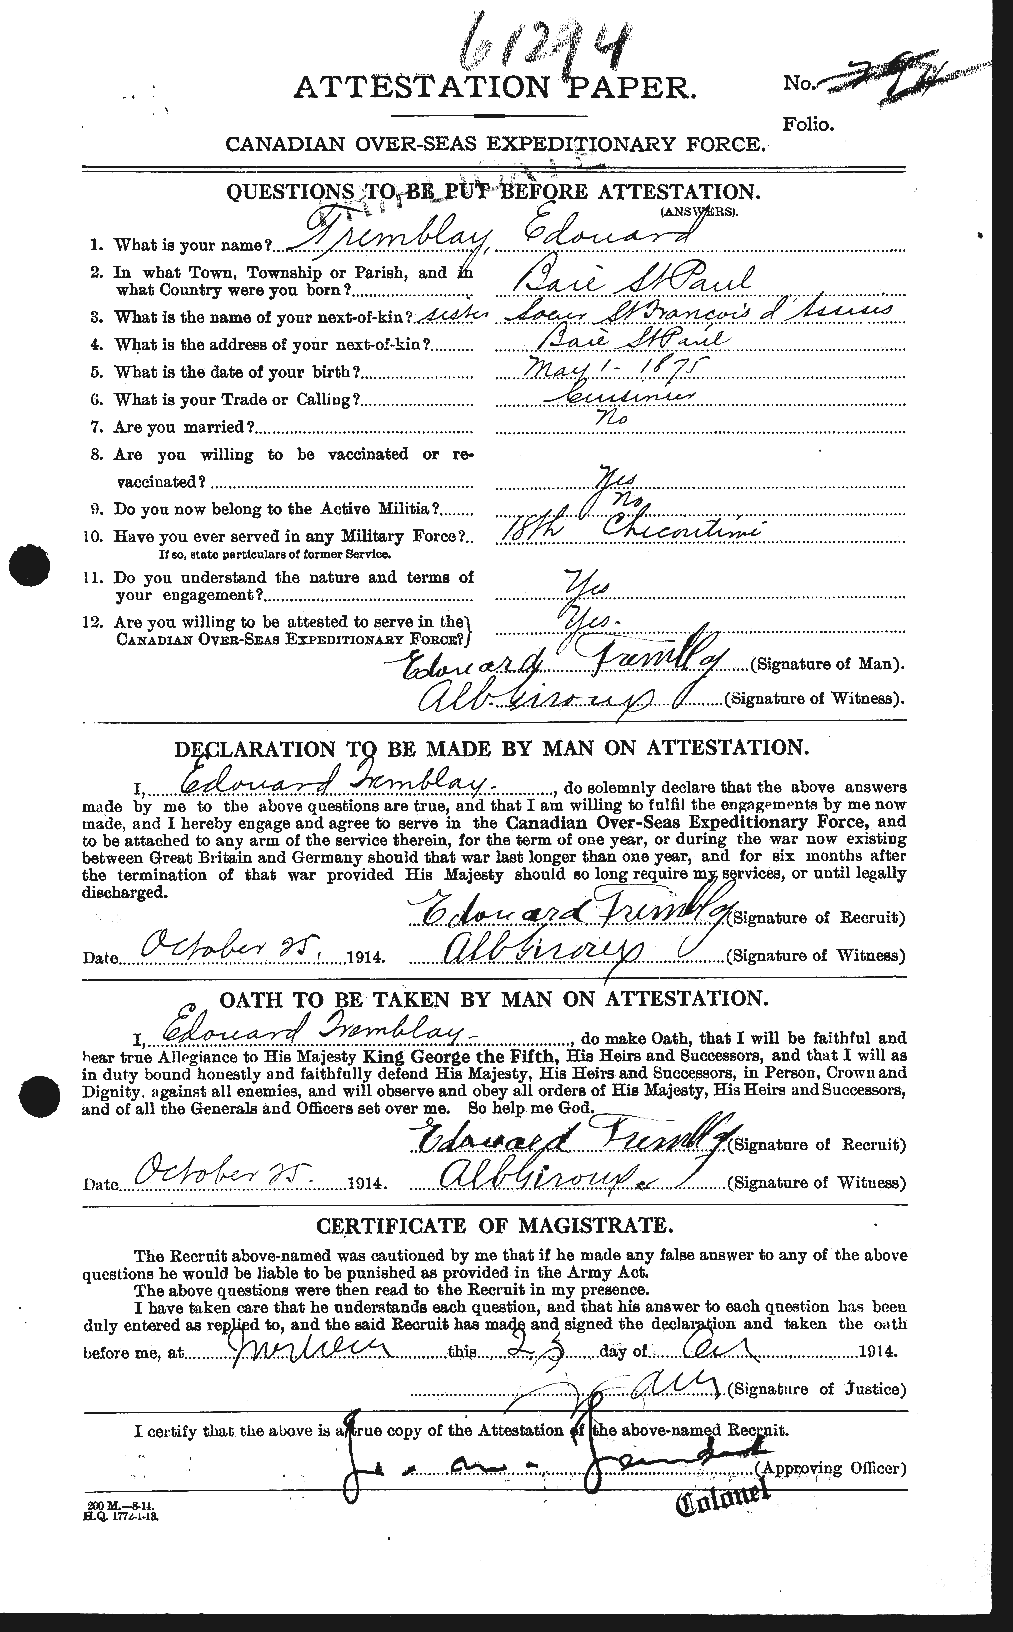 Personnel Records of the First World War - CEF 639007a